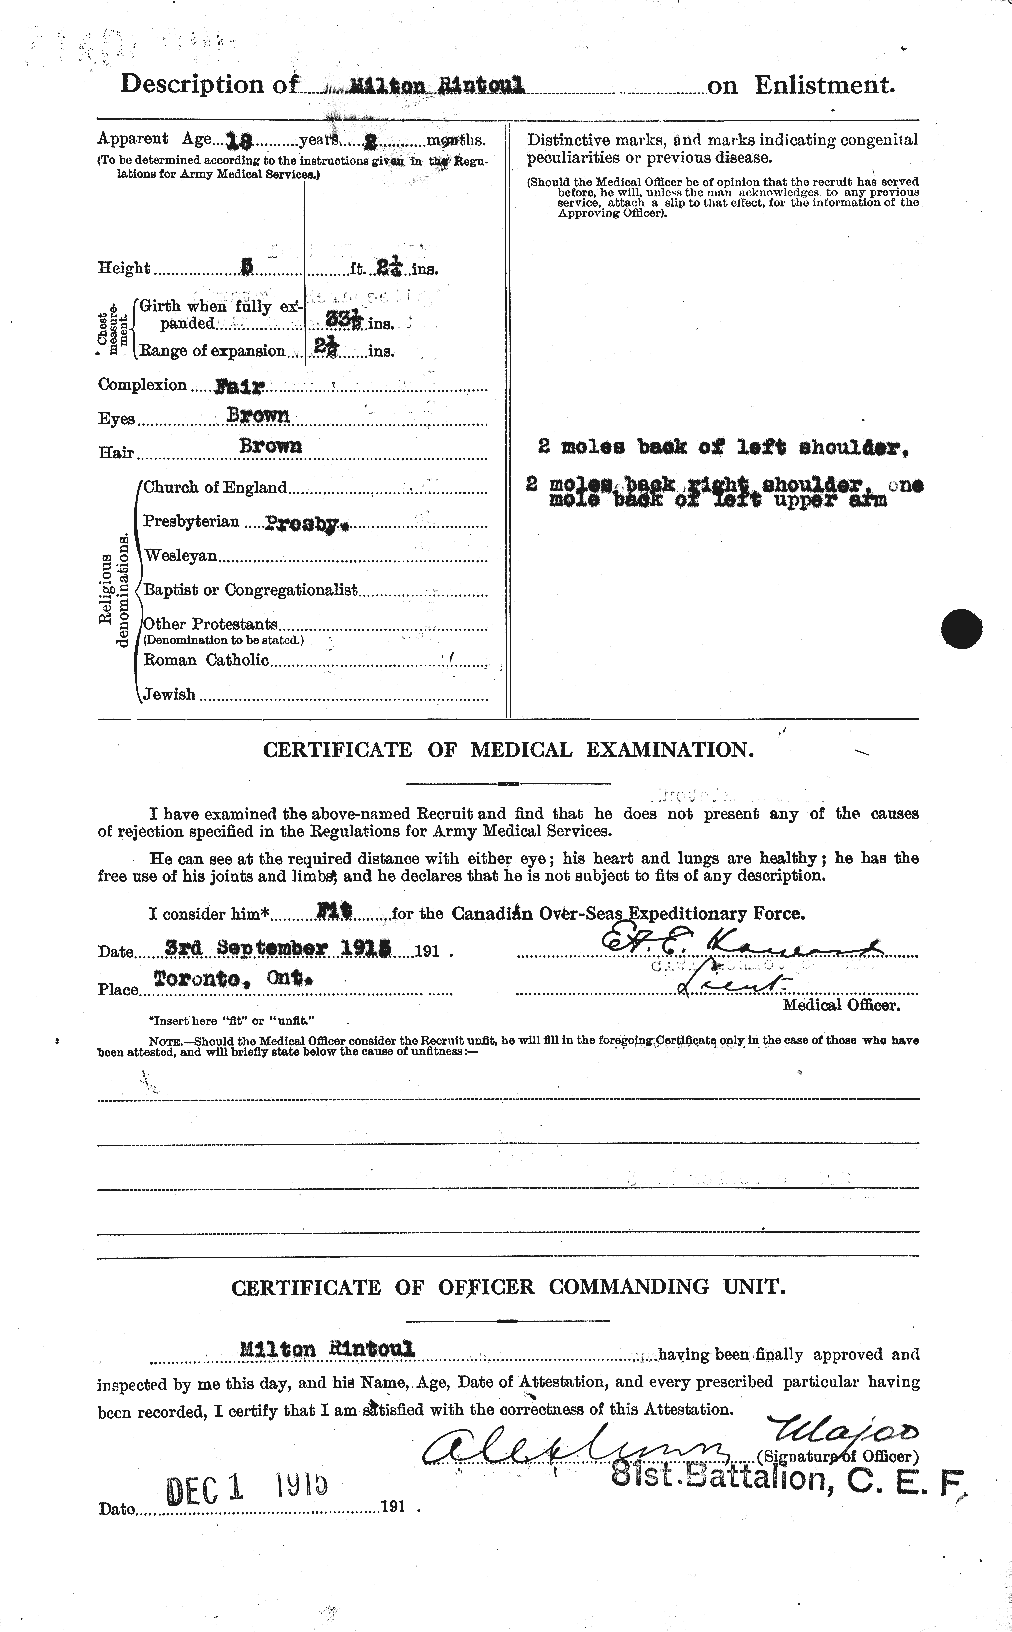 Personnel Records of the First World War - CEF 602806b